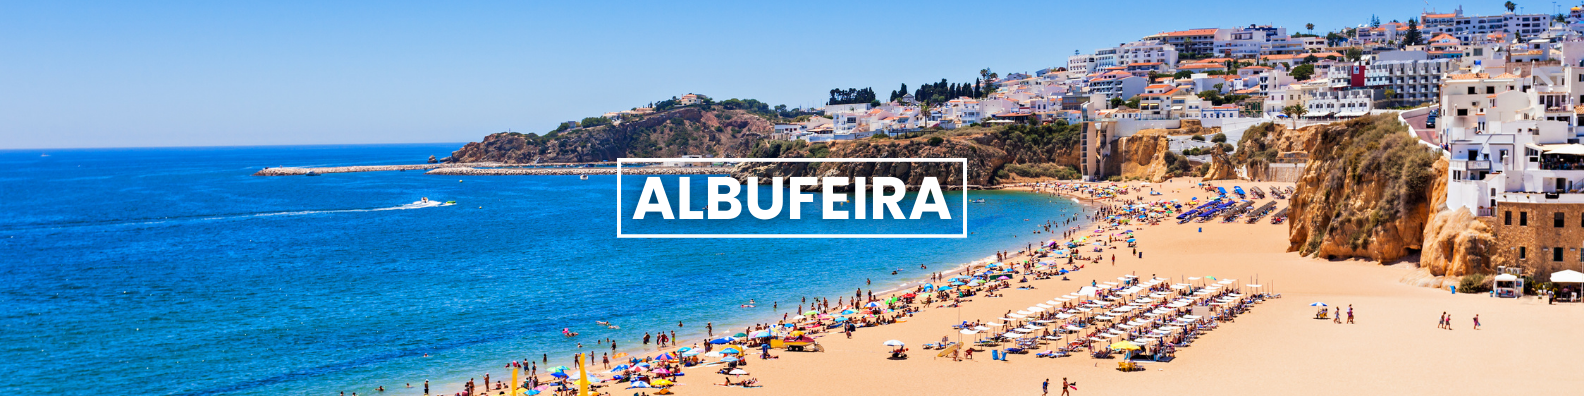 a beach in albufeira with a lot of people on it Barter'sTravelnet